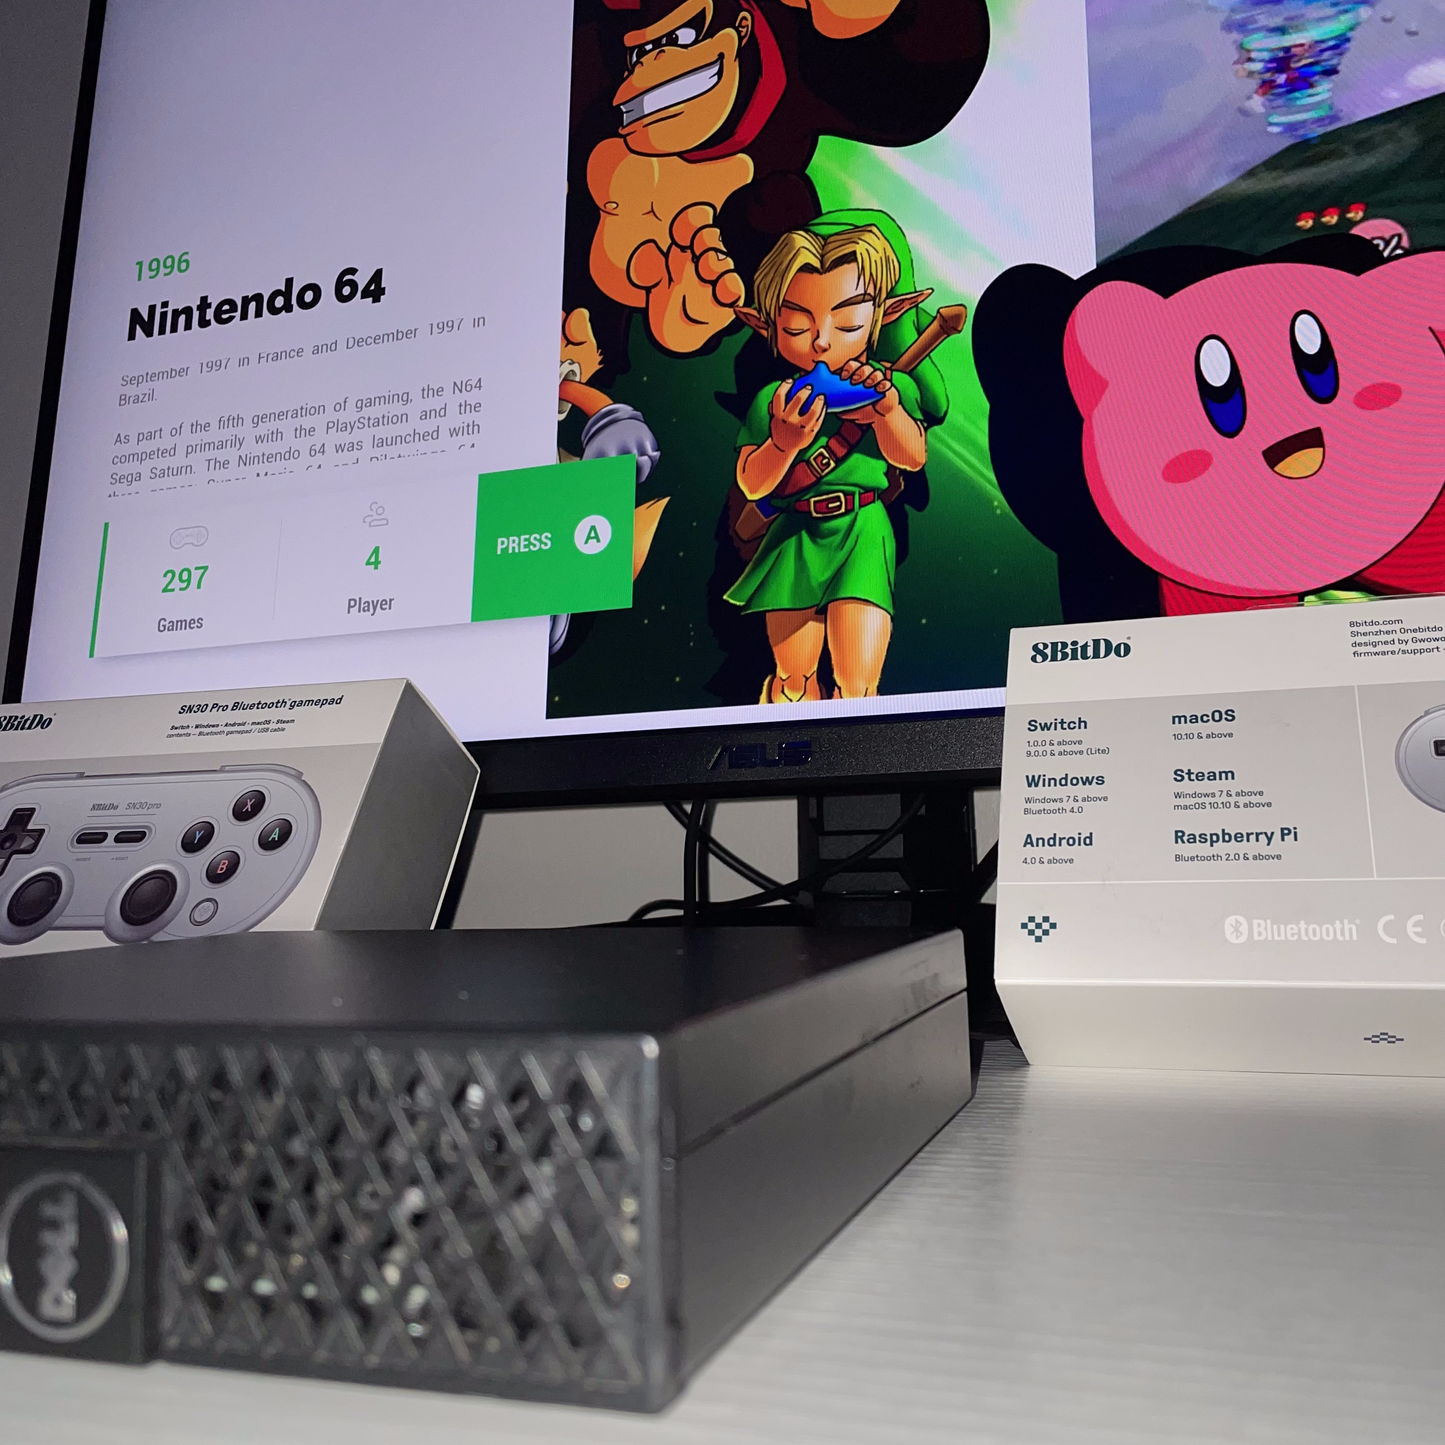 Portable Retro Gaming Emulation PC | Premium 8BitDo Controller Included | Plug and Play ready!